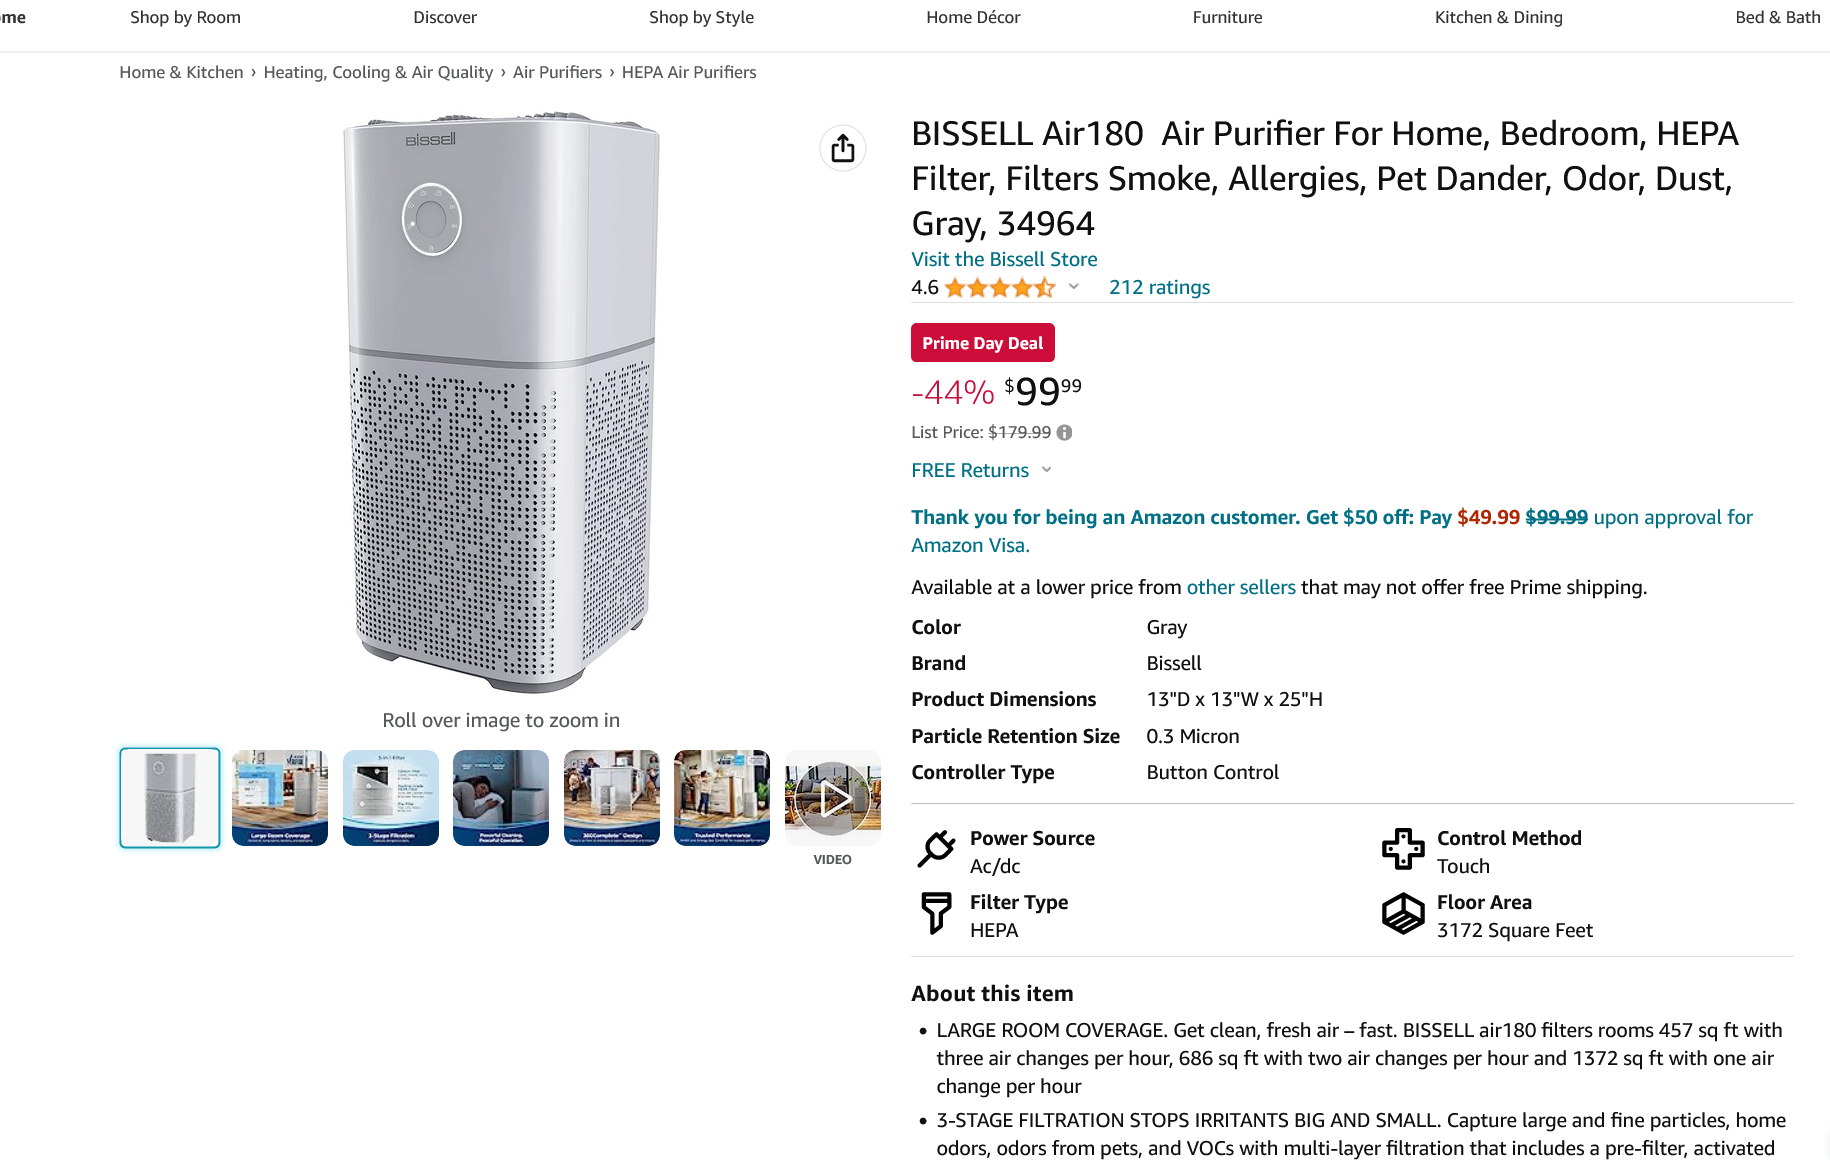 Screenshot 2023-07-11 at 13-00-35 Amazon.com BISSELL Air180 Air Purifier For Home Bedroom HEPA...png